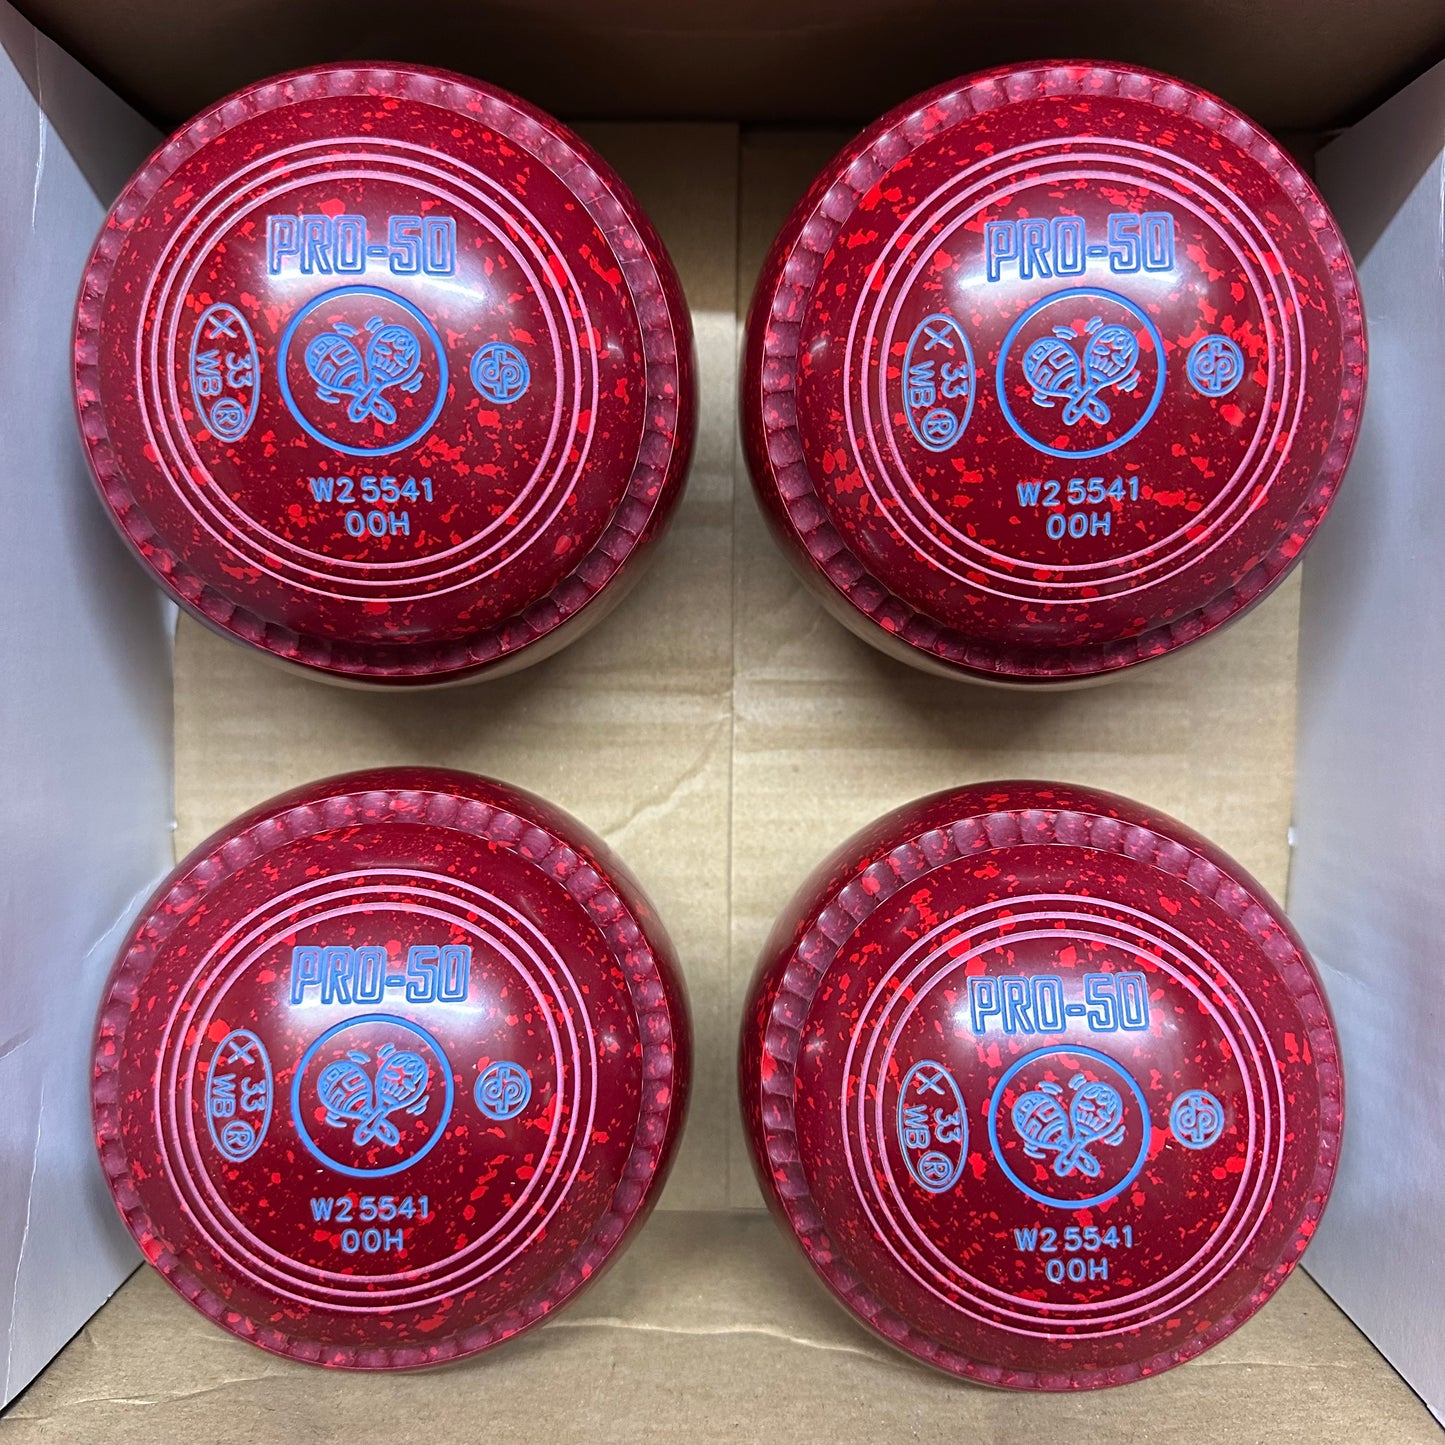 Drakes Pride PRO-50 - Size 00H - Maroon/Red (Blue Rings) - WB33 Stamp